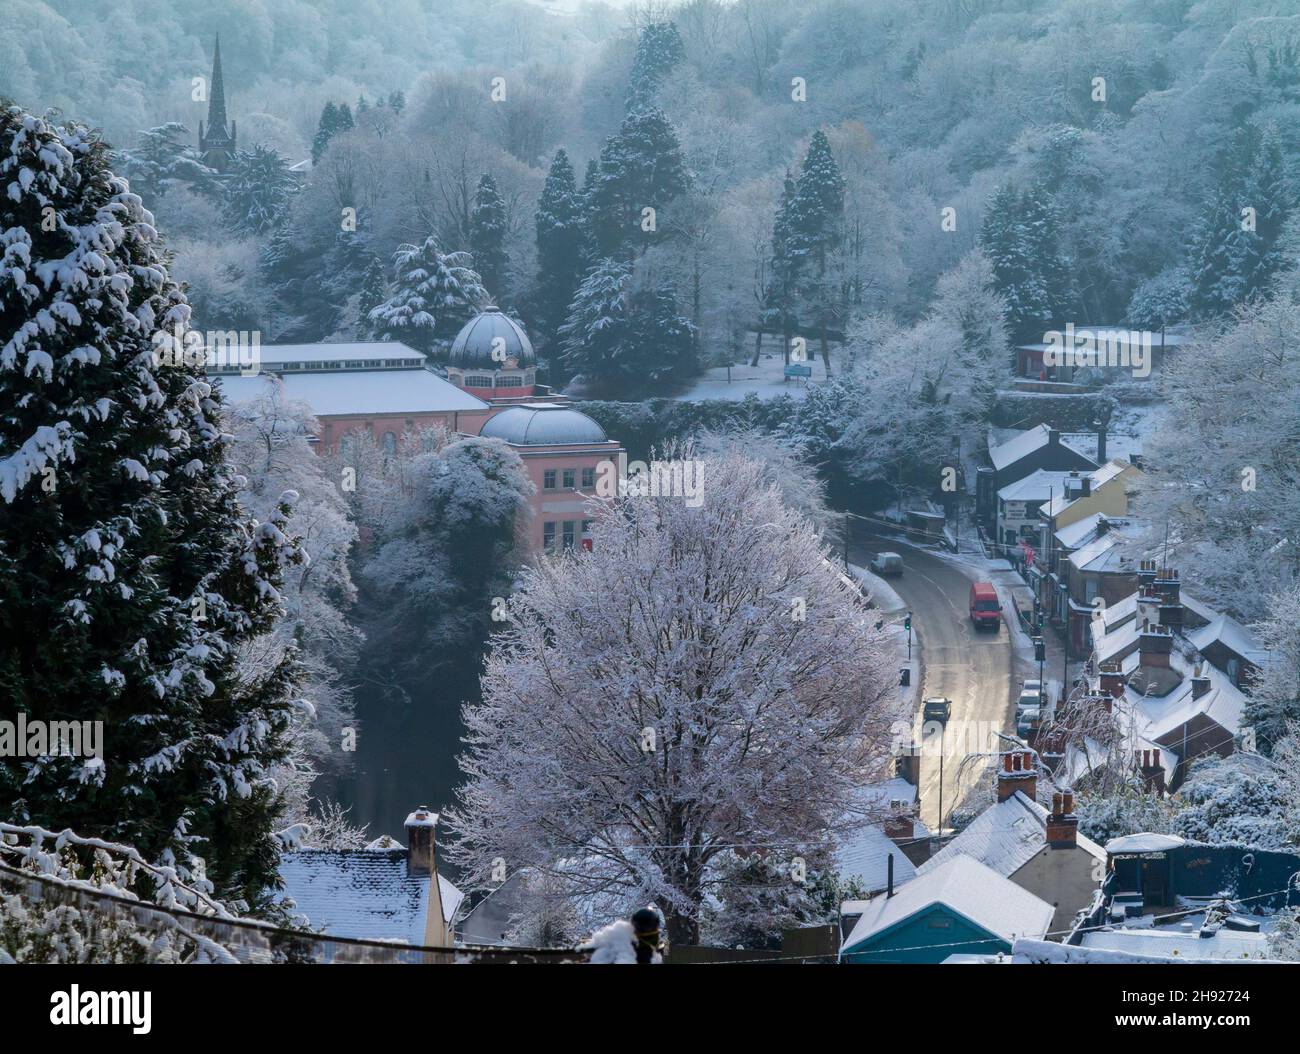 Snow covered landscape with trees at Matlock Bath in the Derbyshire Peak District England UK with traffic on the A6 road visible. Stock Photo